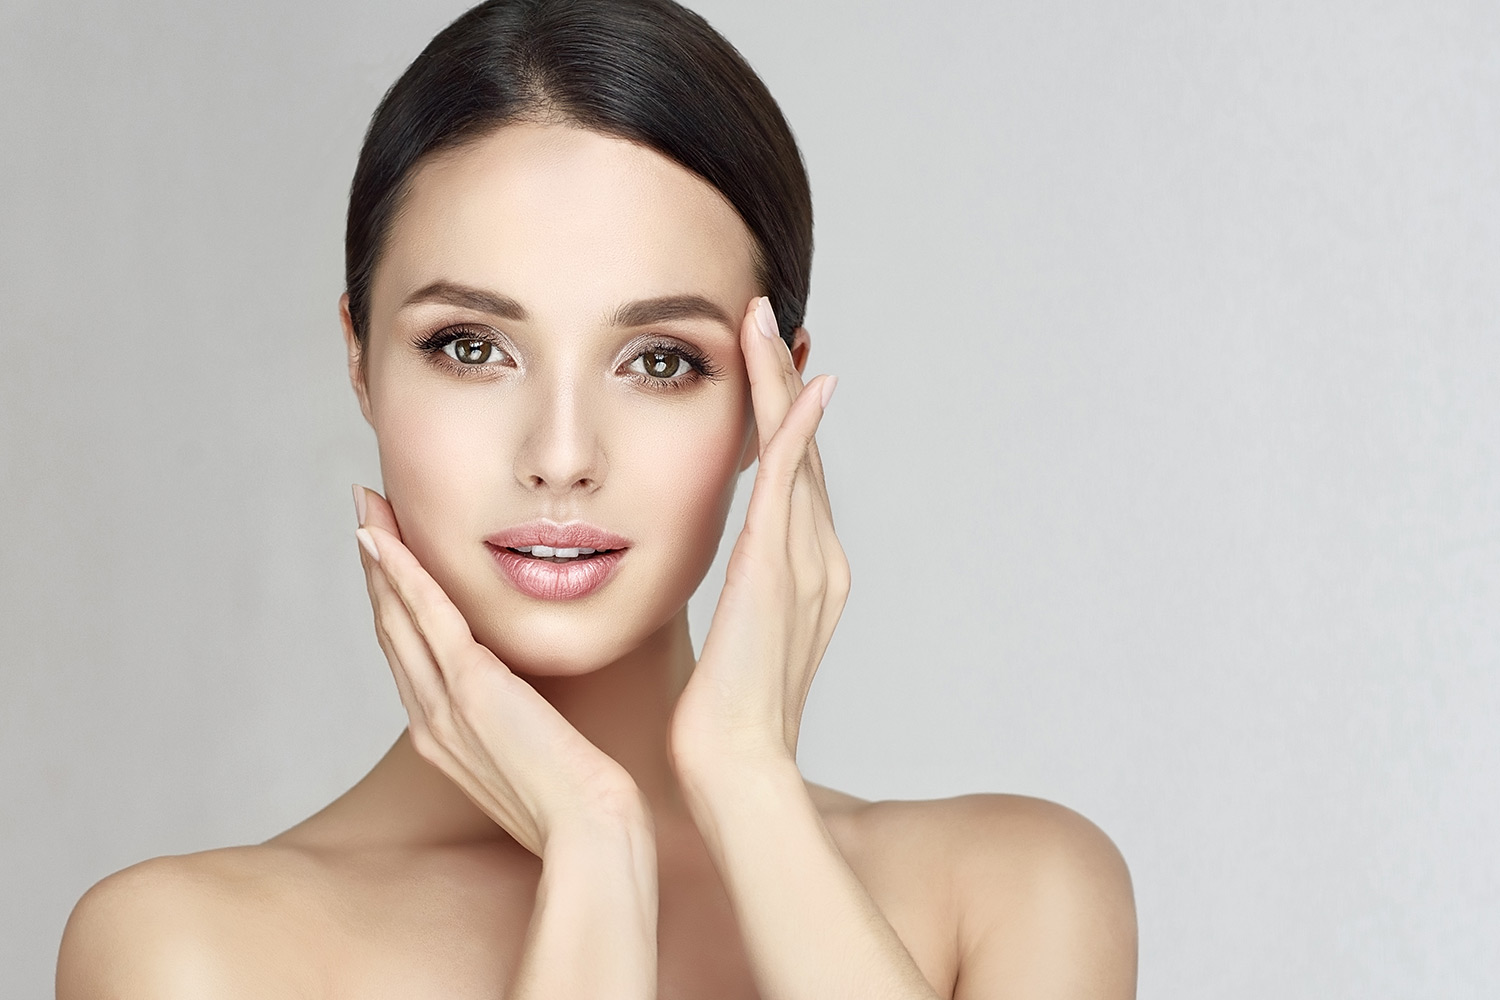 Non-surgical Face lift with ULTRAFORMER